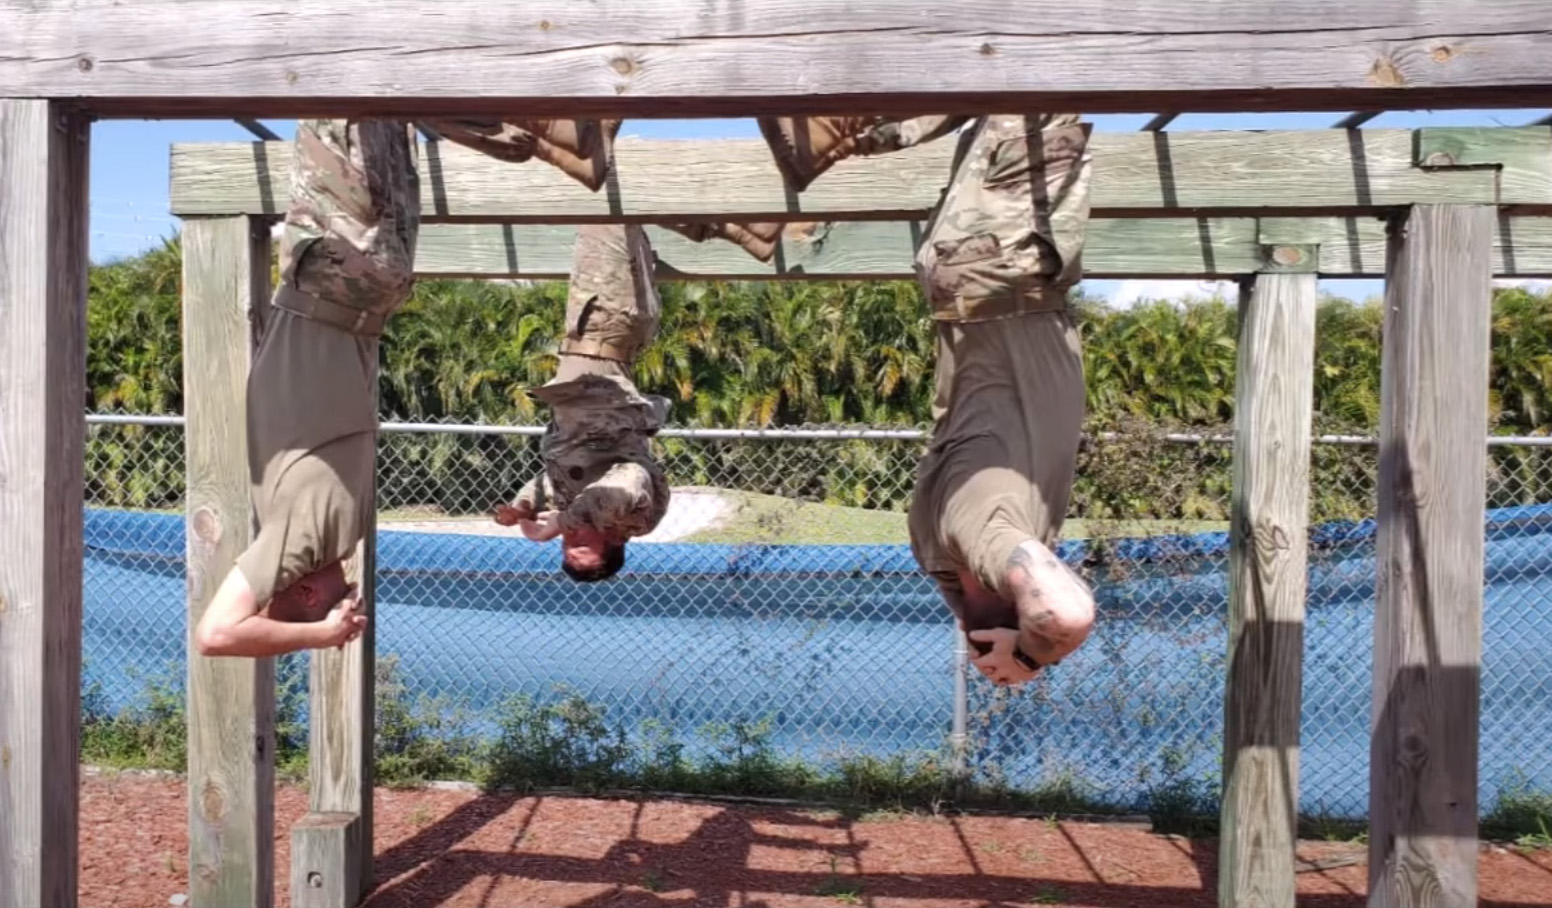 rotc students hanging from exercise bars